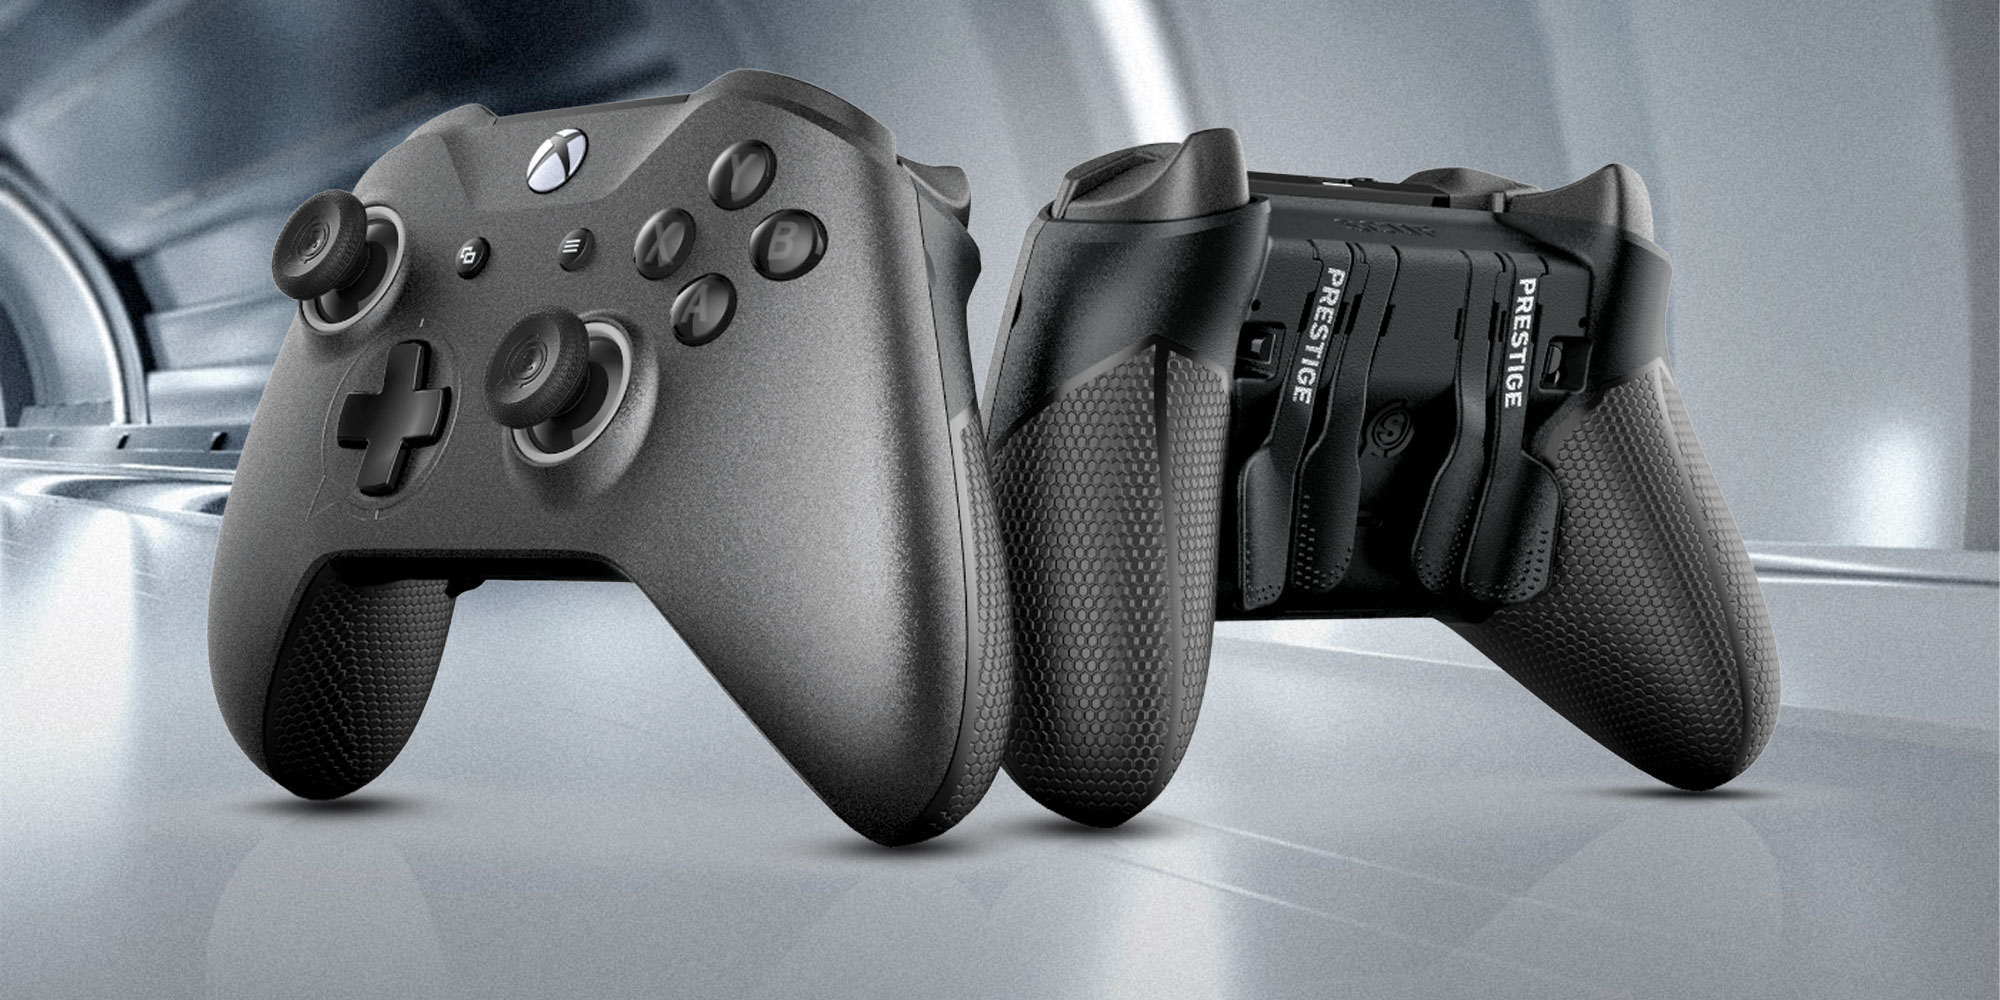 scuf paddles for xbox one controller